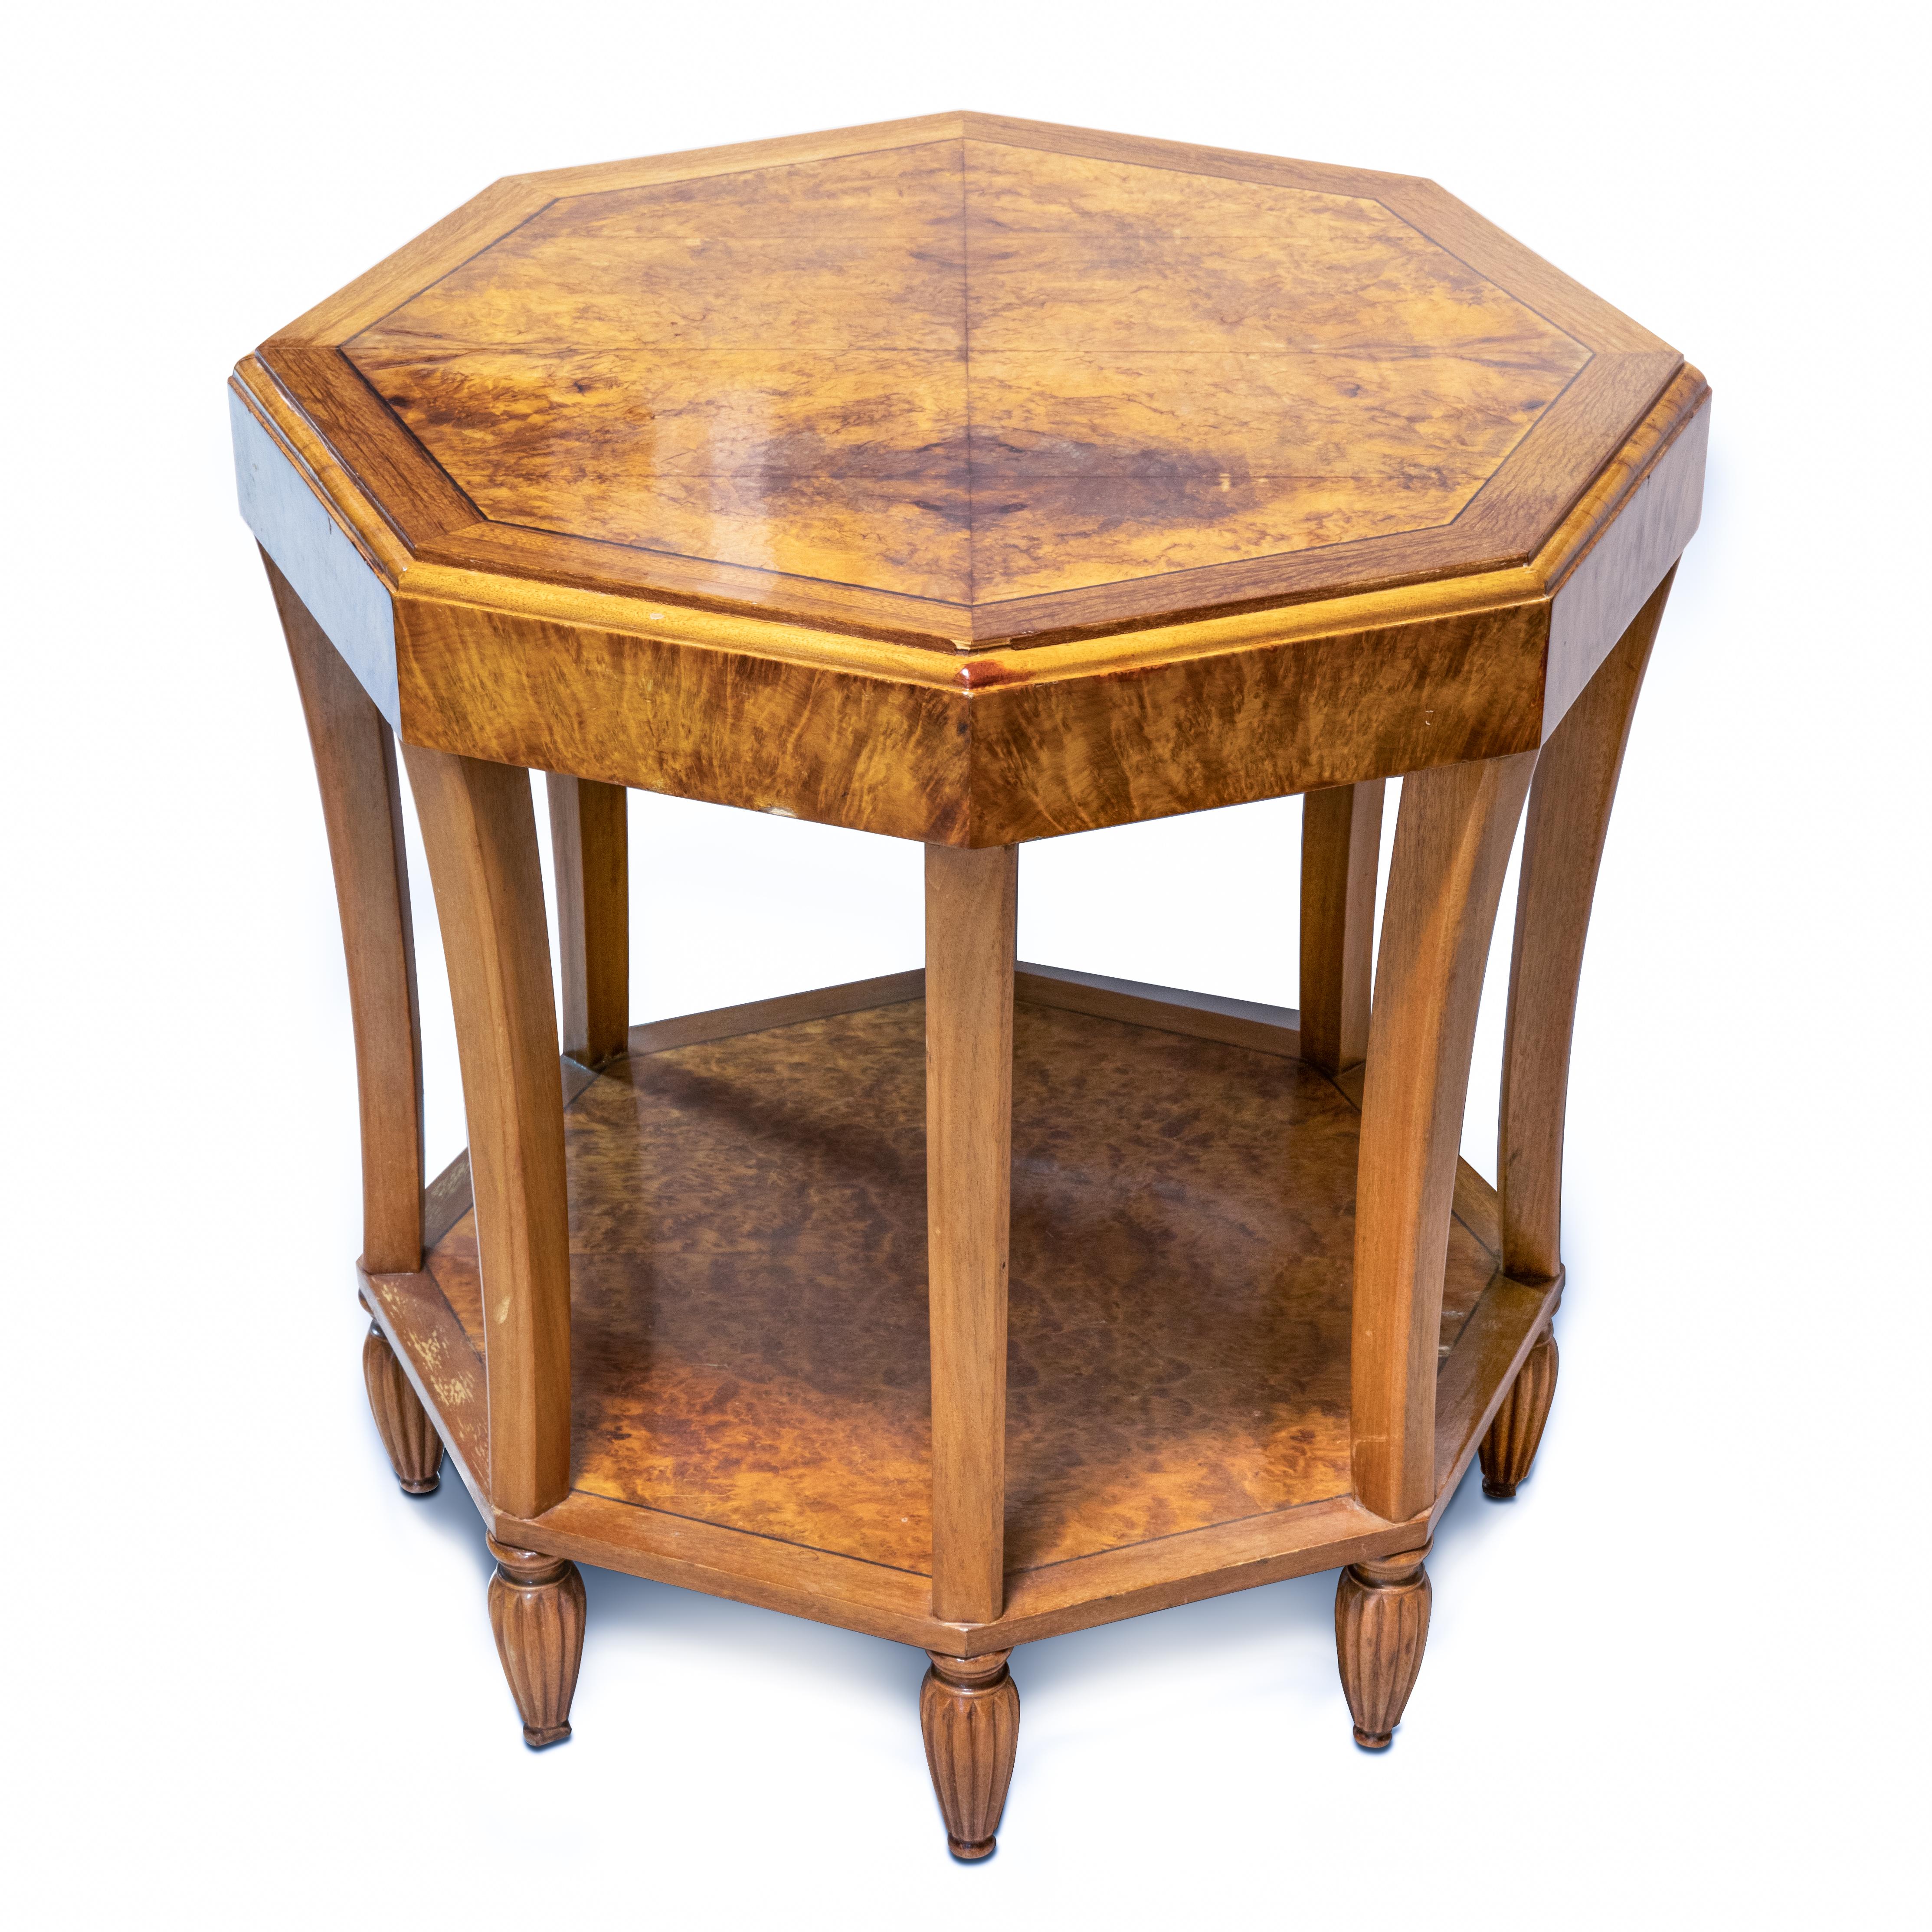 Burl walnut Art Deco side table, France, circa 1920, octagonal top, unsigned, height 24, diameter 25 1/4 in.